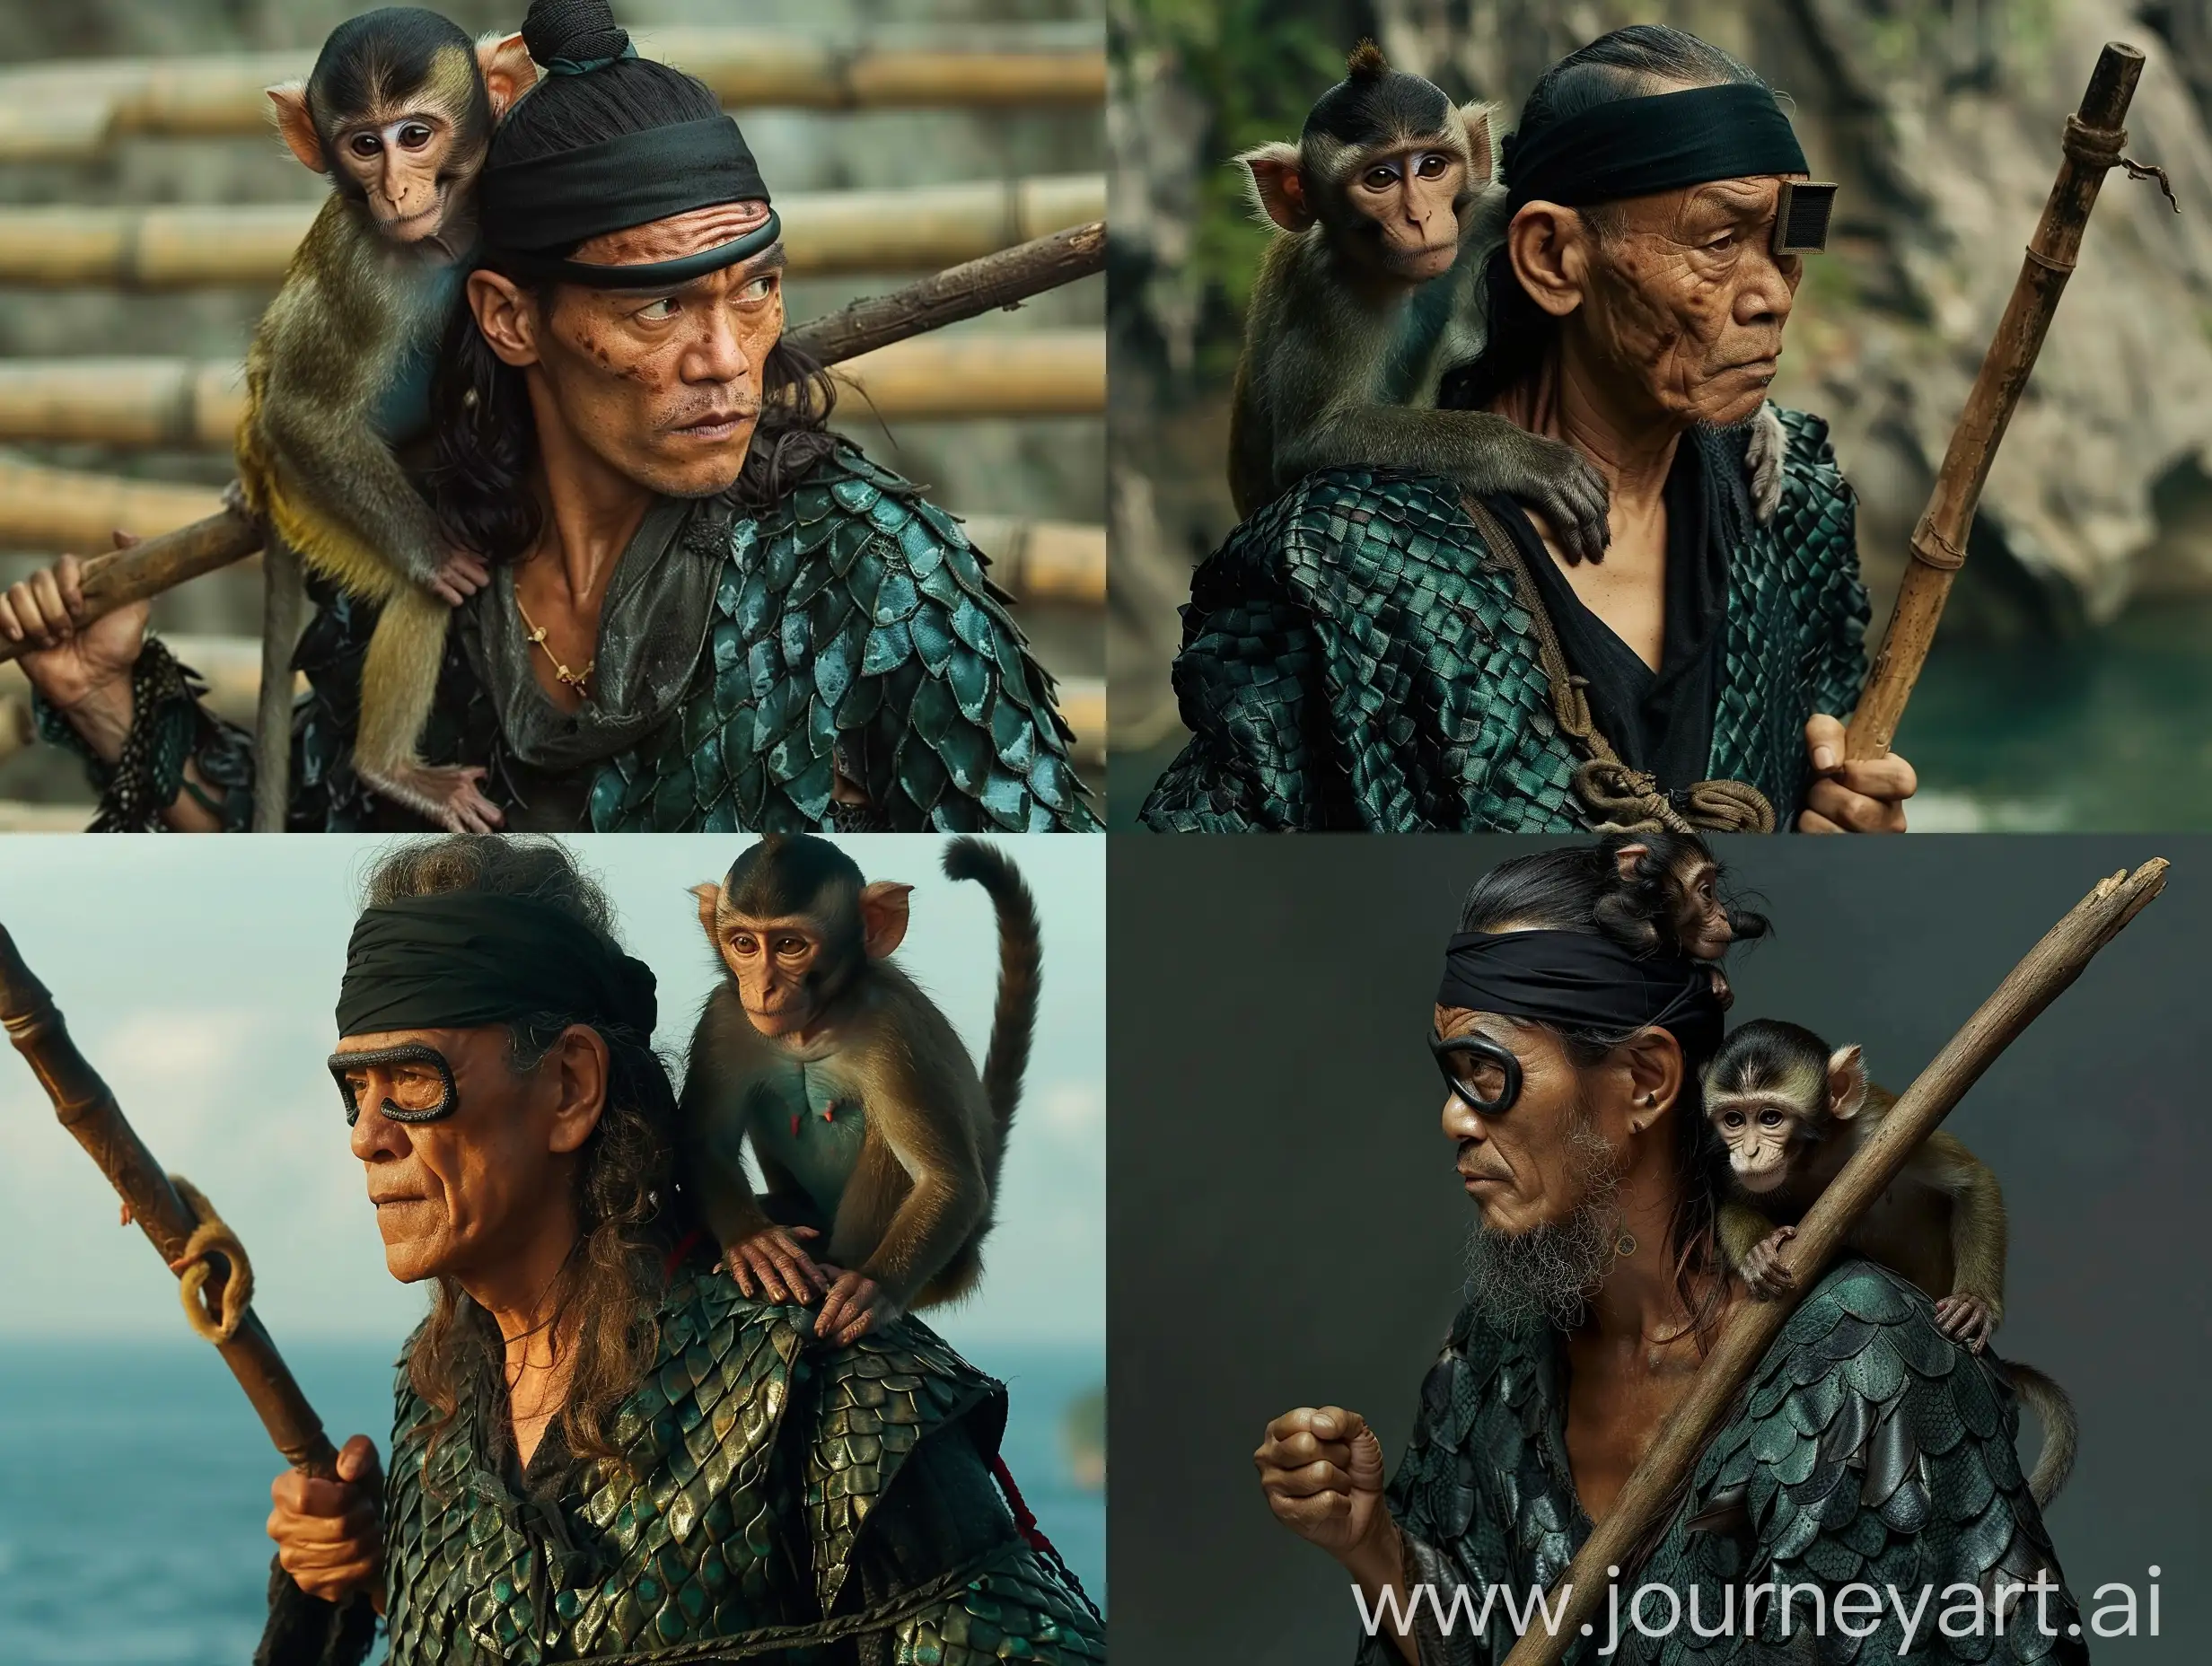 Blind-Indonesian-Male-Warrior-with-Monkey-Companion-in-Dark-Green-Snake-Scale-Attire